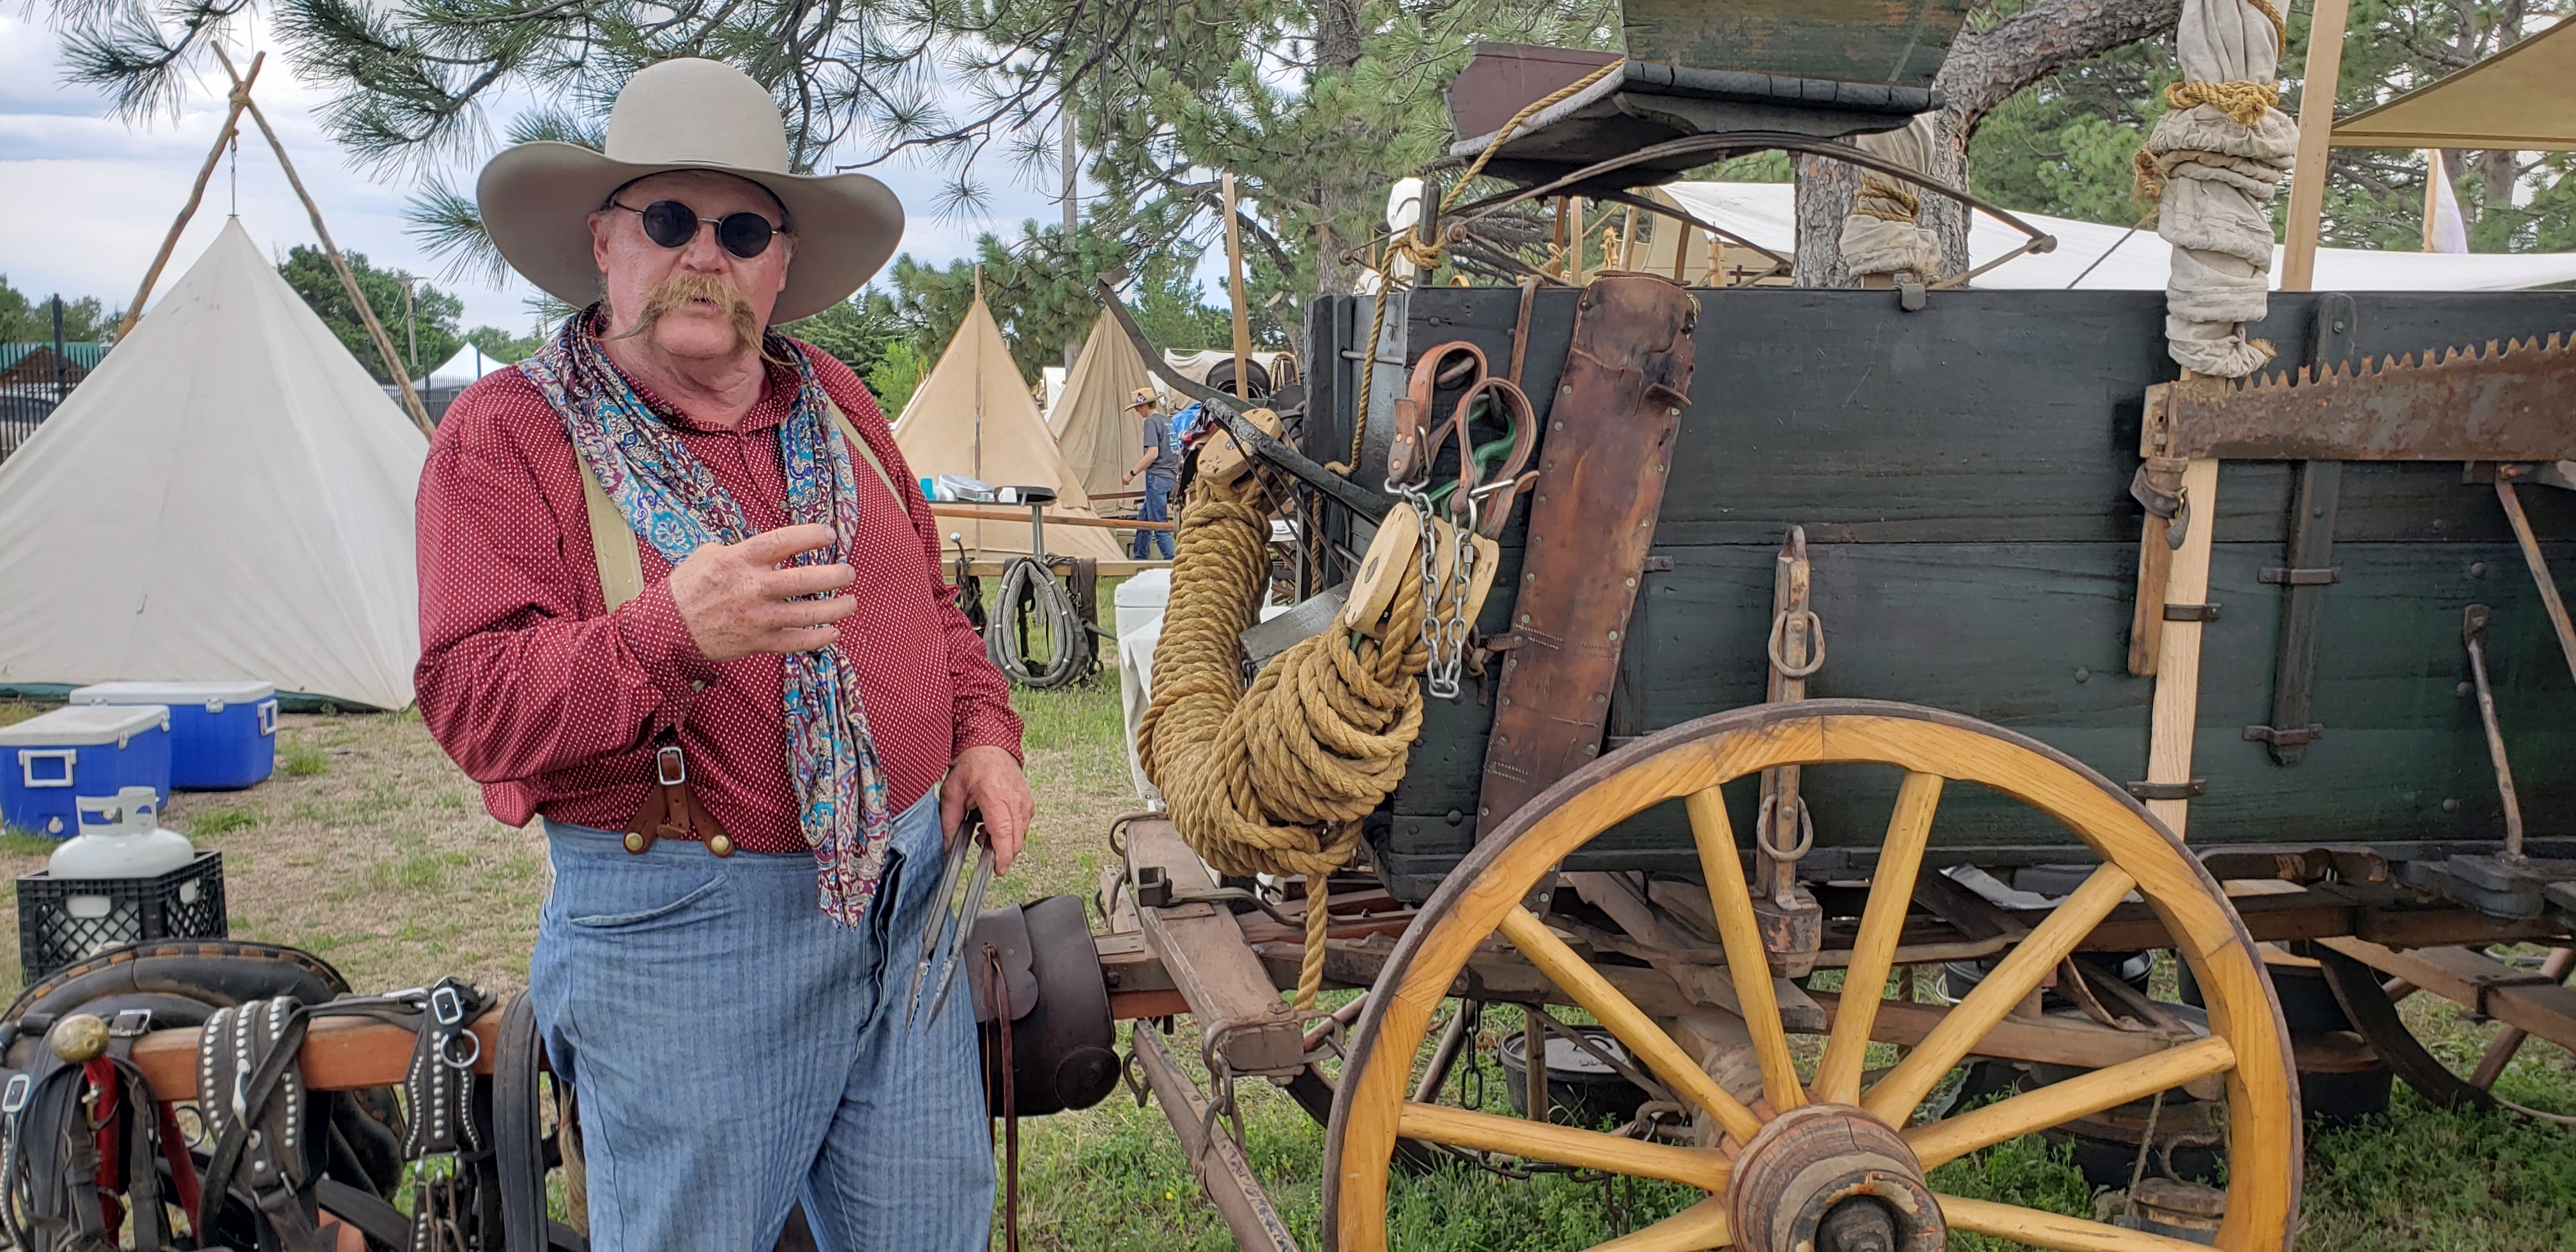 https://cowboystatedaily.imgix.net/Chuckwagon-Rich-Herman-talks-about-the-1902-Peter-Schuttler-Wagon-he-and-his-wife-Deb-use-for-chuckwagon-cooking-events-like-the-one-at-Cheyenne-Frontier-Days-7.28.23.jpg